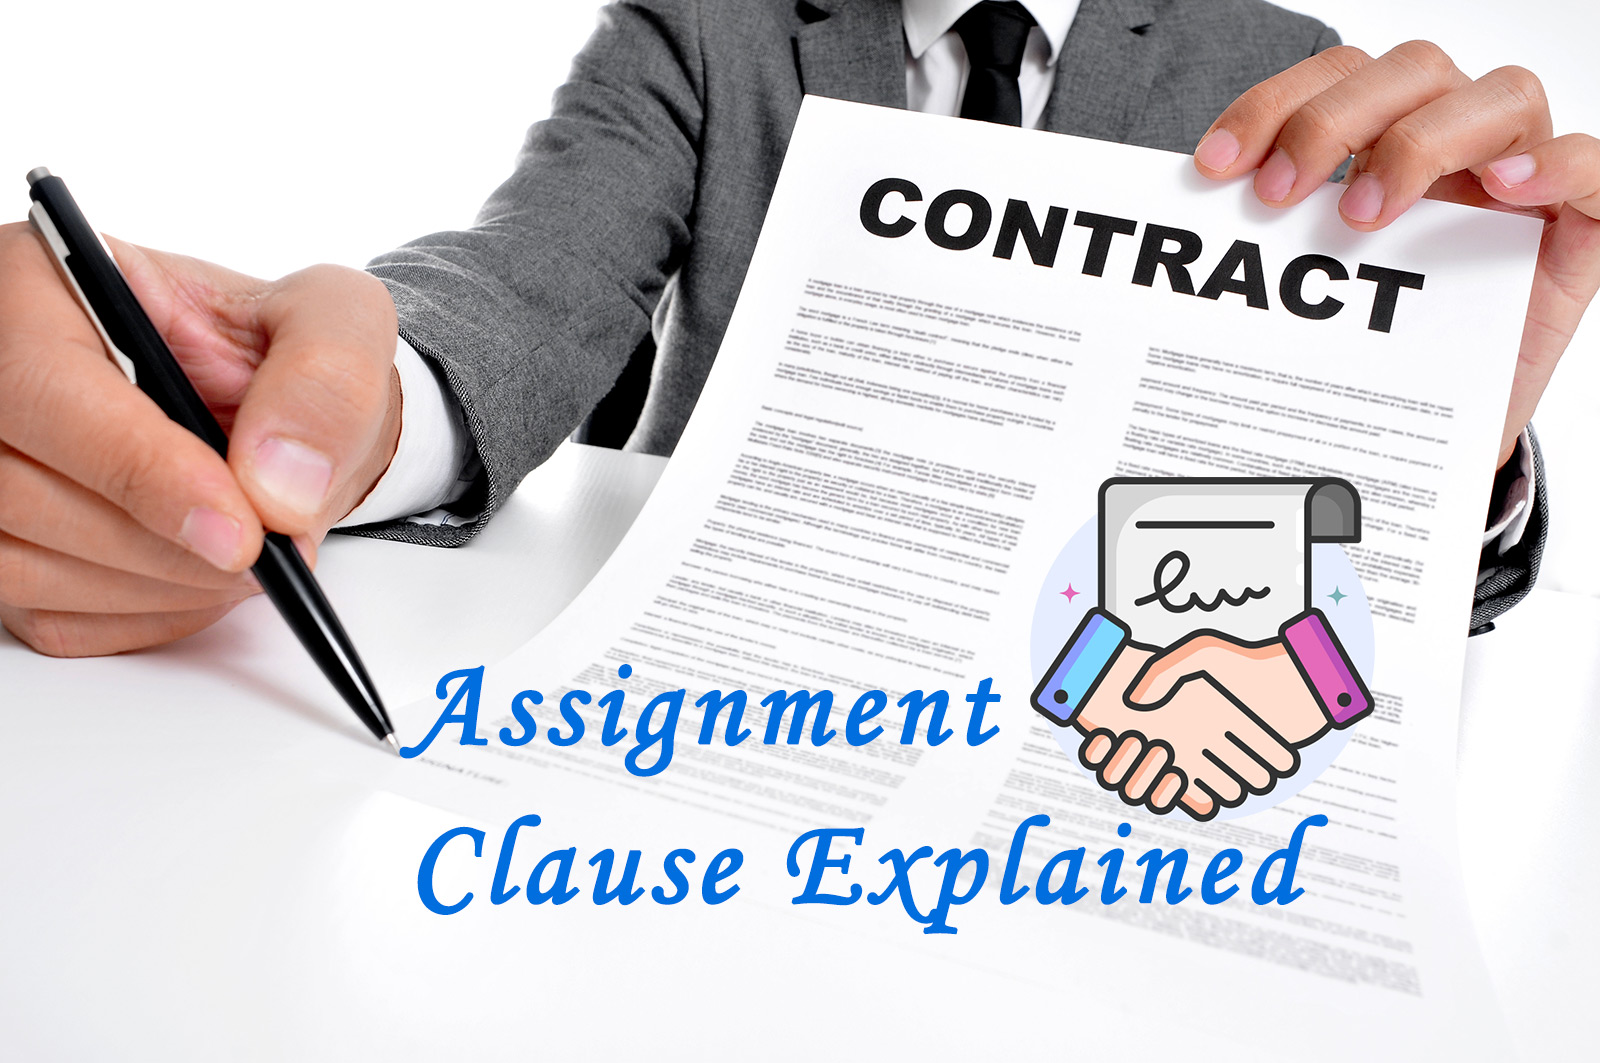 que significa assignment clause